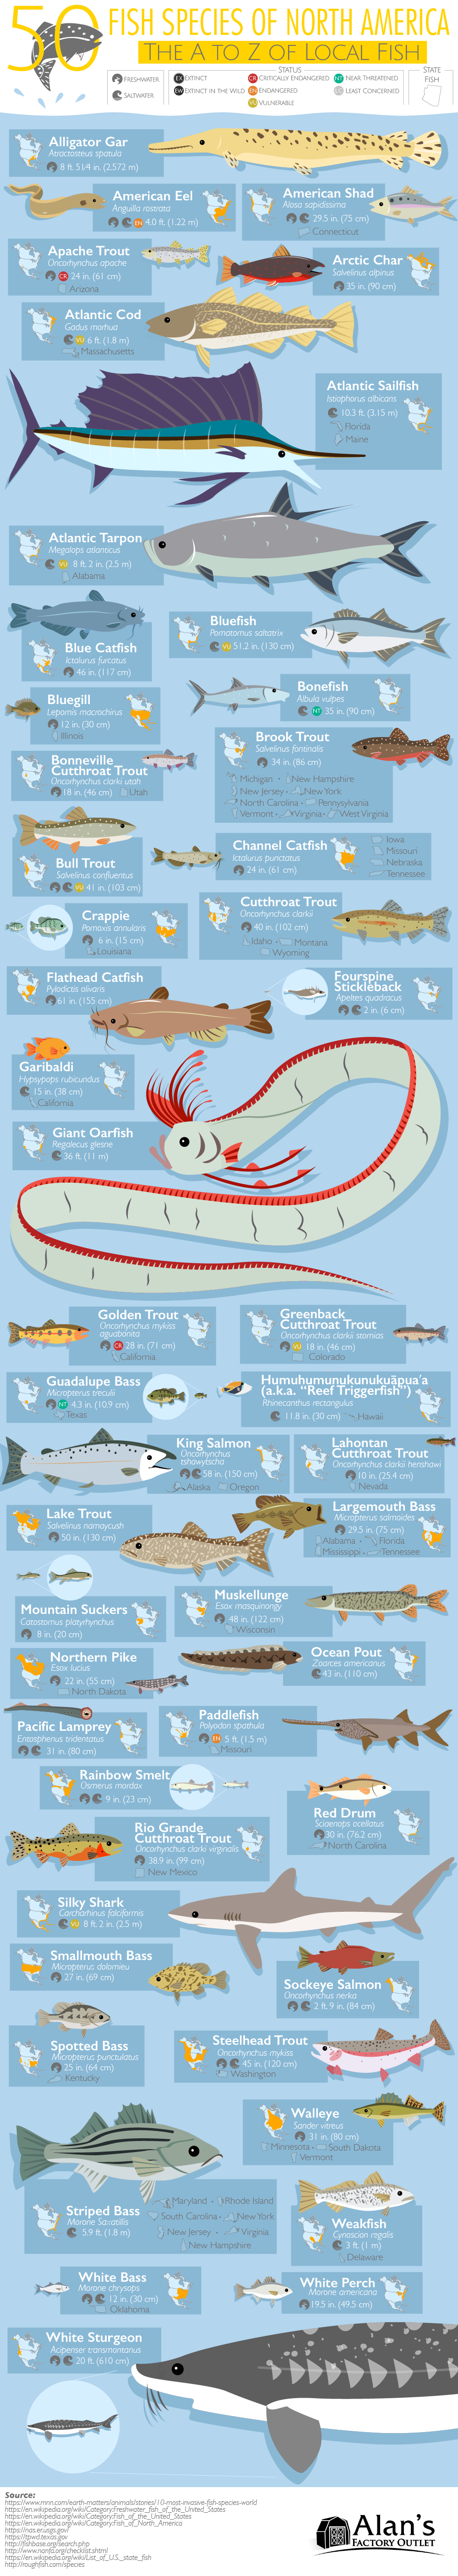 Know Your Fish: 50 Species of North America - Infographic